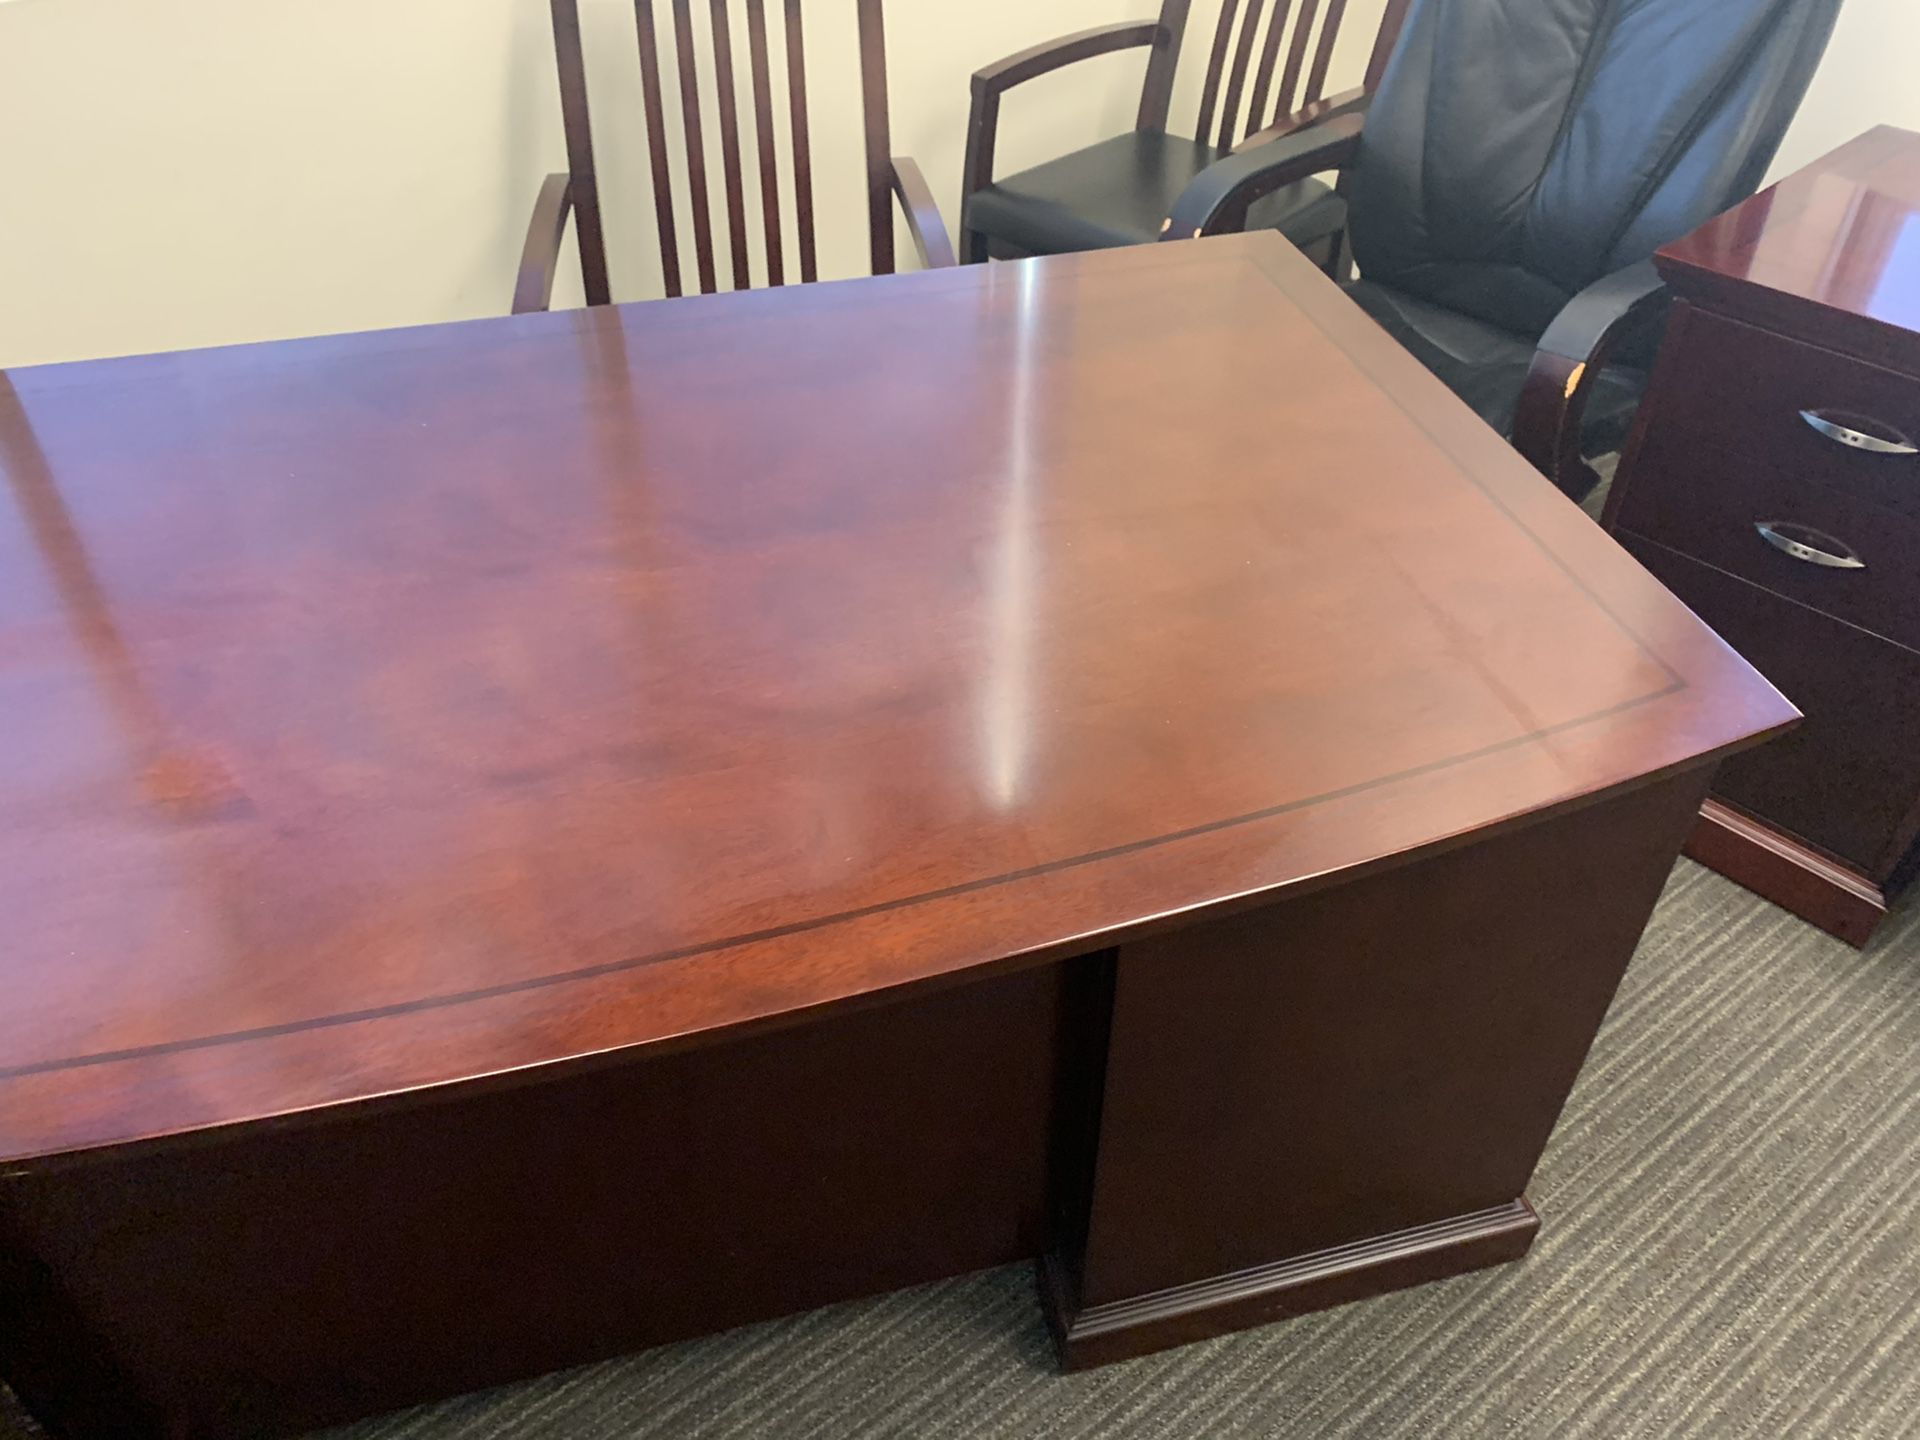 MUST GO THIS WKND - Office Furniture-Solid Wood - Cherry color